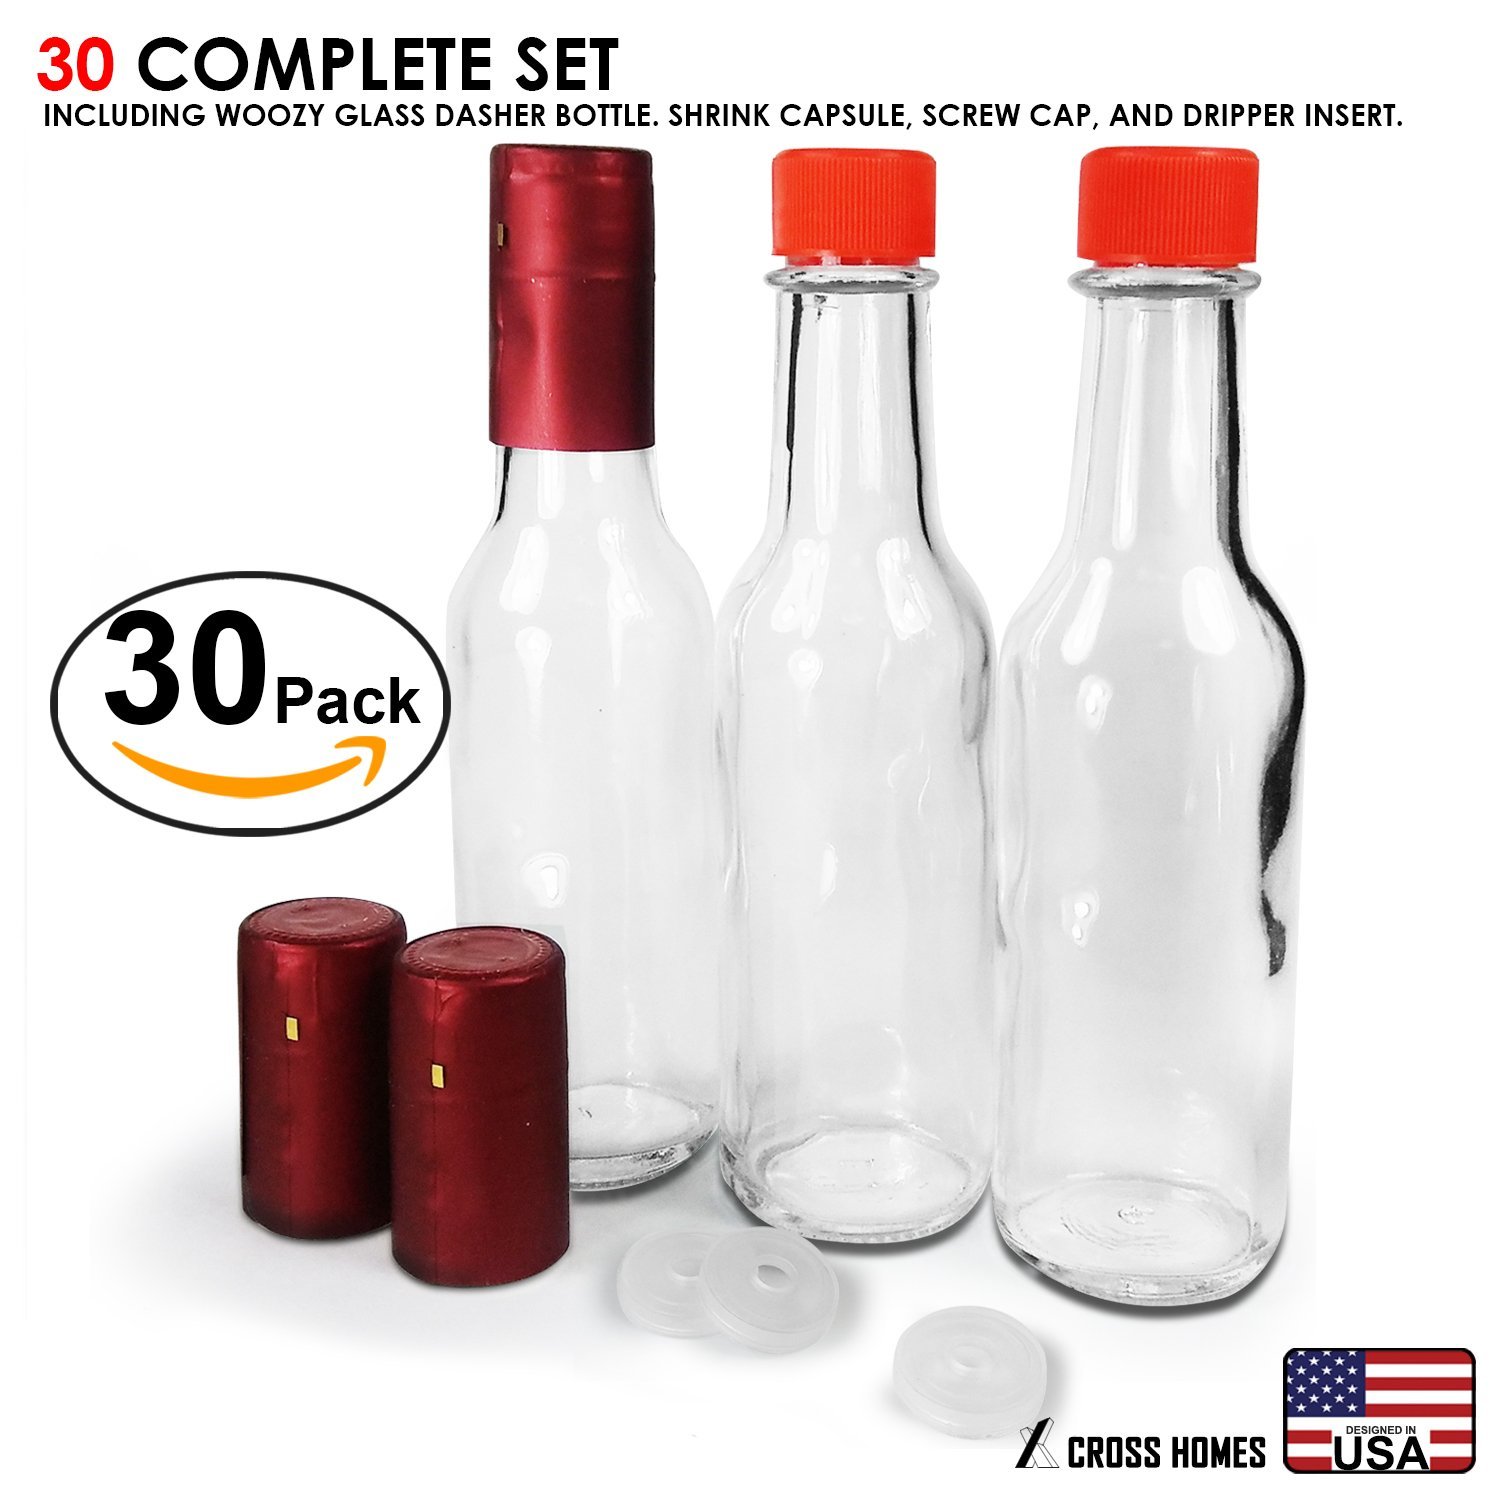 5 oz, Glass Woozy Hot Sauce Bottles - Case of 24 with Screw Caps, Inserts &  Shrink Capsules